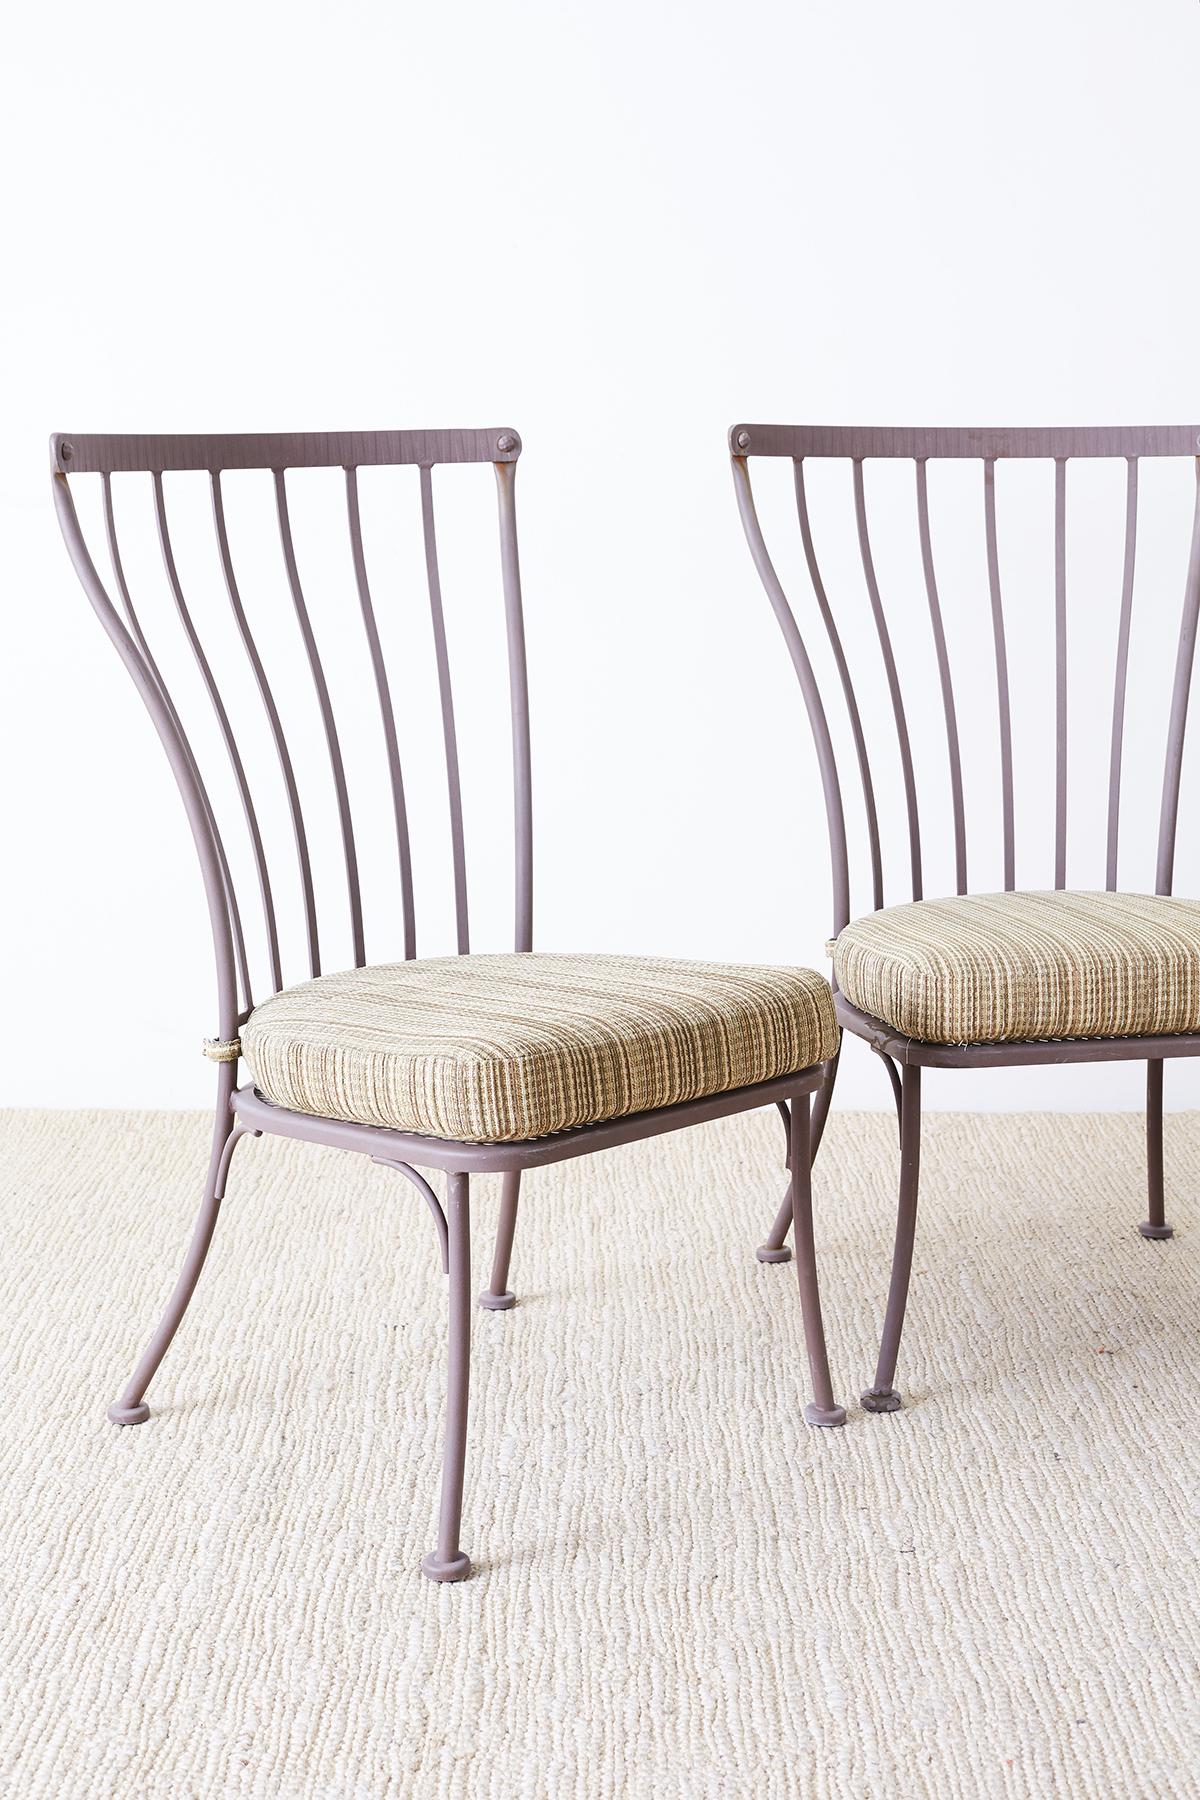 Large set of four patio garden dining chairs made by California artisans O.W. Lee Monterra collection which features hand-hammered finishes made from galvanized steel. Part of a large collection of O.W. Lee furniture from an estate in Pacific